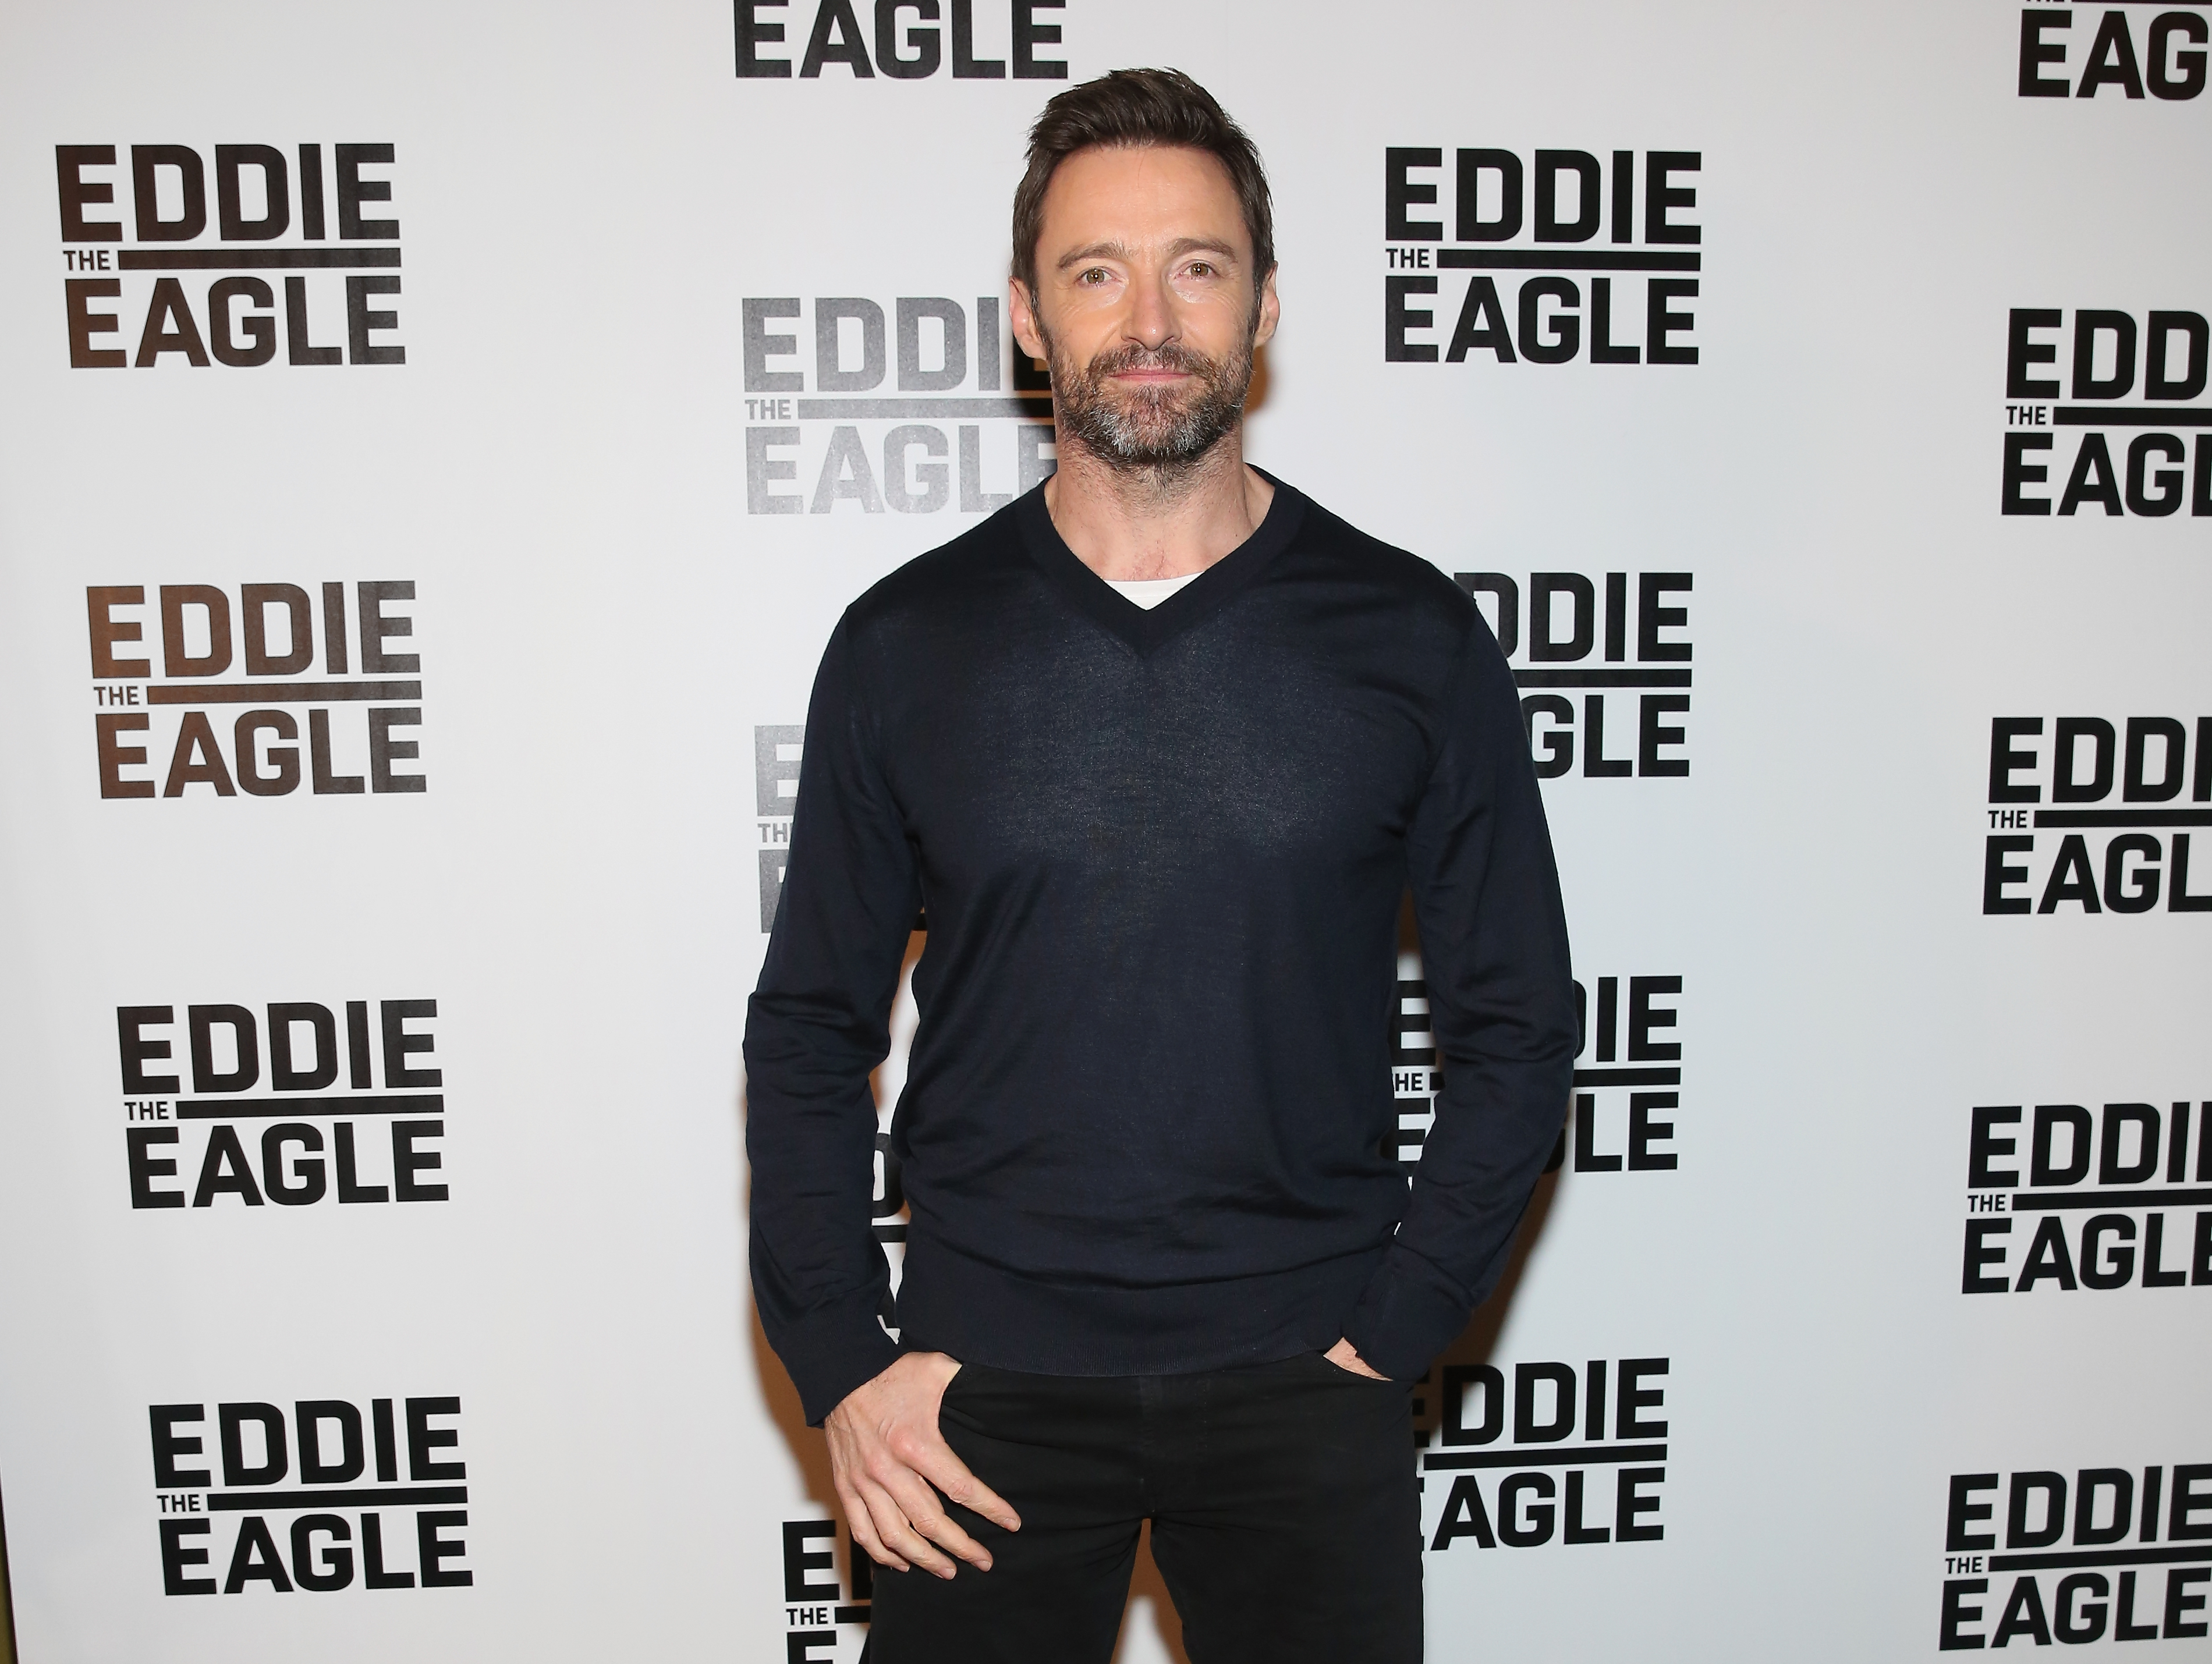 Hugh Jackman attends the "Eddie The Eagle" Screening at Landmark Sunshine Theater on February 2, 2016 in New York City. (Monica Schipper/Getty Images)